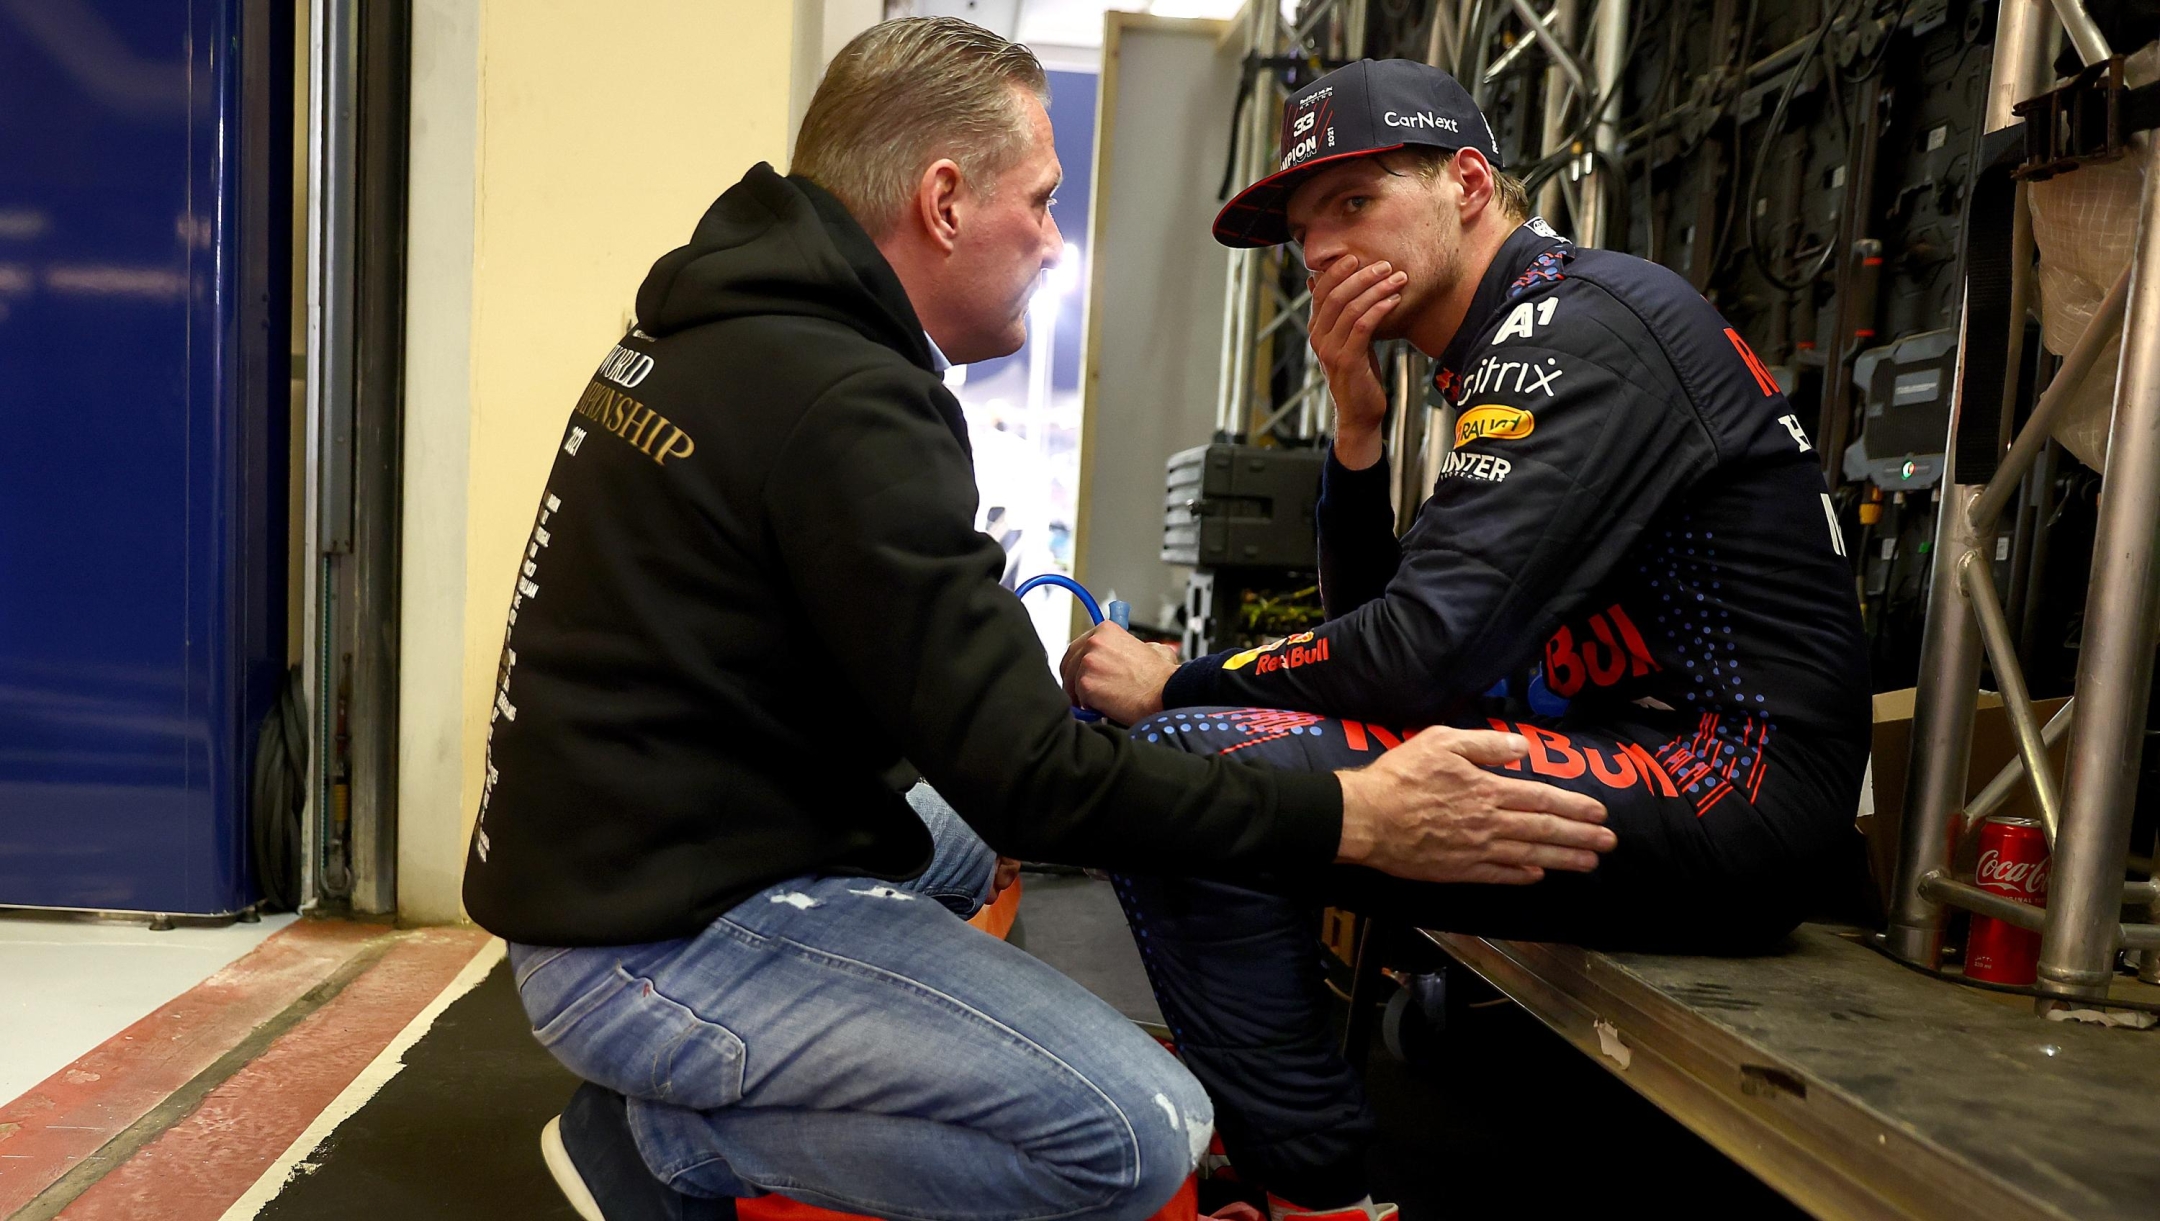 ABU DHABI, UNITED ARAB EMIRATES - DECEMBER 12: Race winner and 2021 F1 World Drivers Champion Max Verstappen of Netherlands and Red Bull Racing celebrates with his father Jos Verstappen in parc ferme during the F1 Grand Prix of Abu Dhabi at Yas Marina Circuit on December 12, 2021 in Abu Dhabi, United Arab Emirates. (Photo by Mark Thompson/Getty Images)